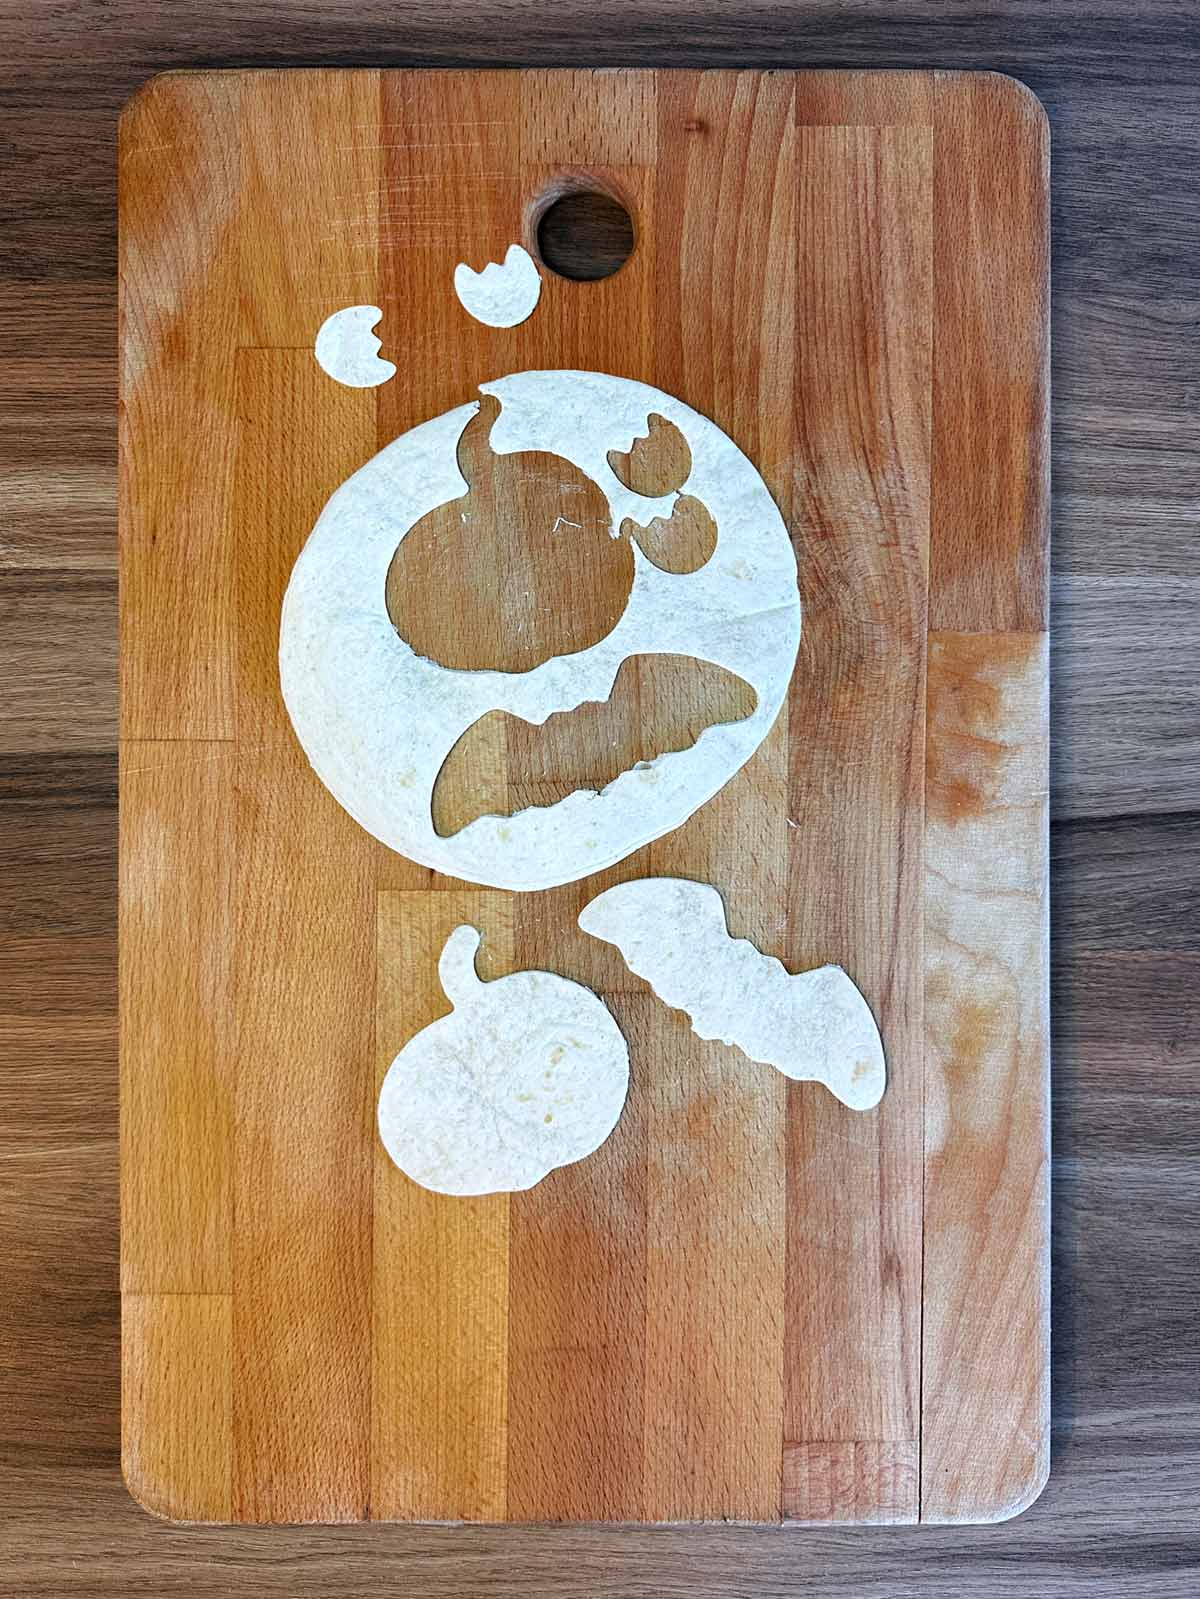 A flour tortilla with halloween shapes cut out of it.